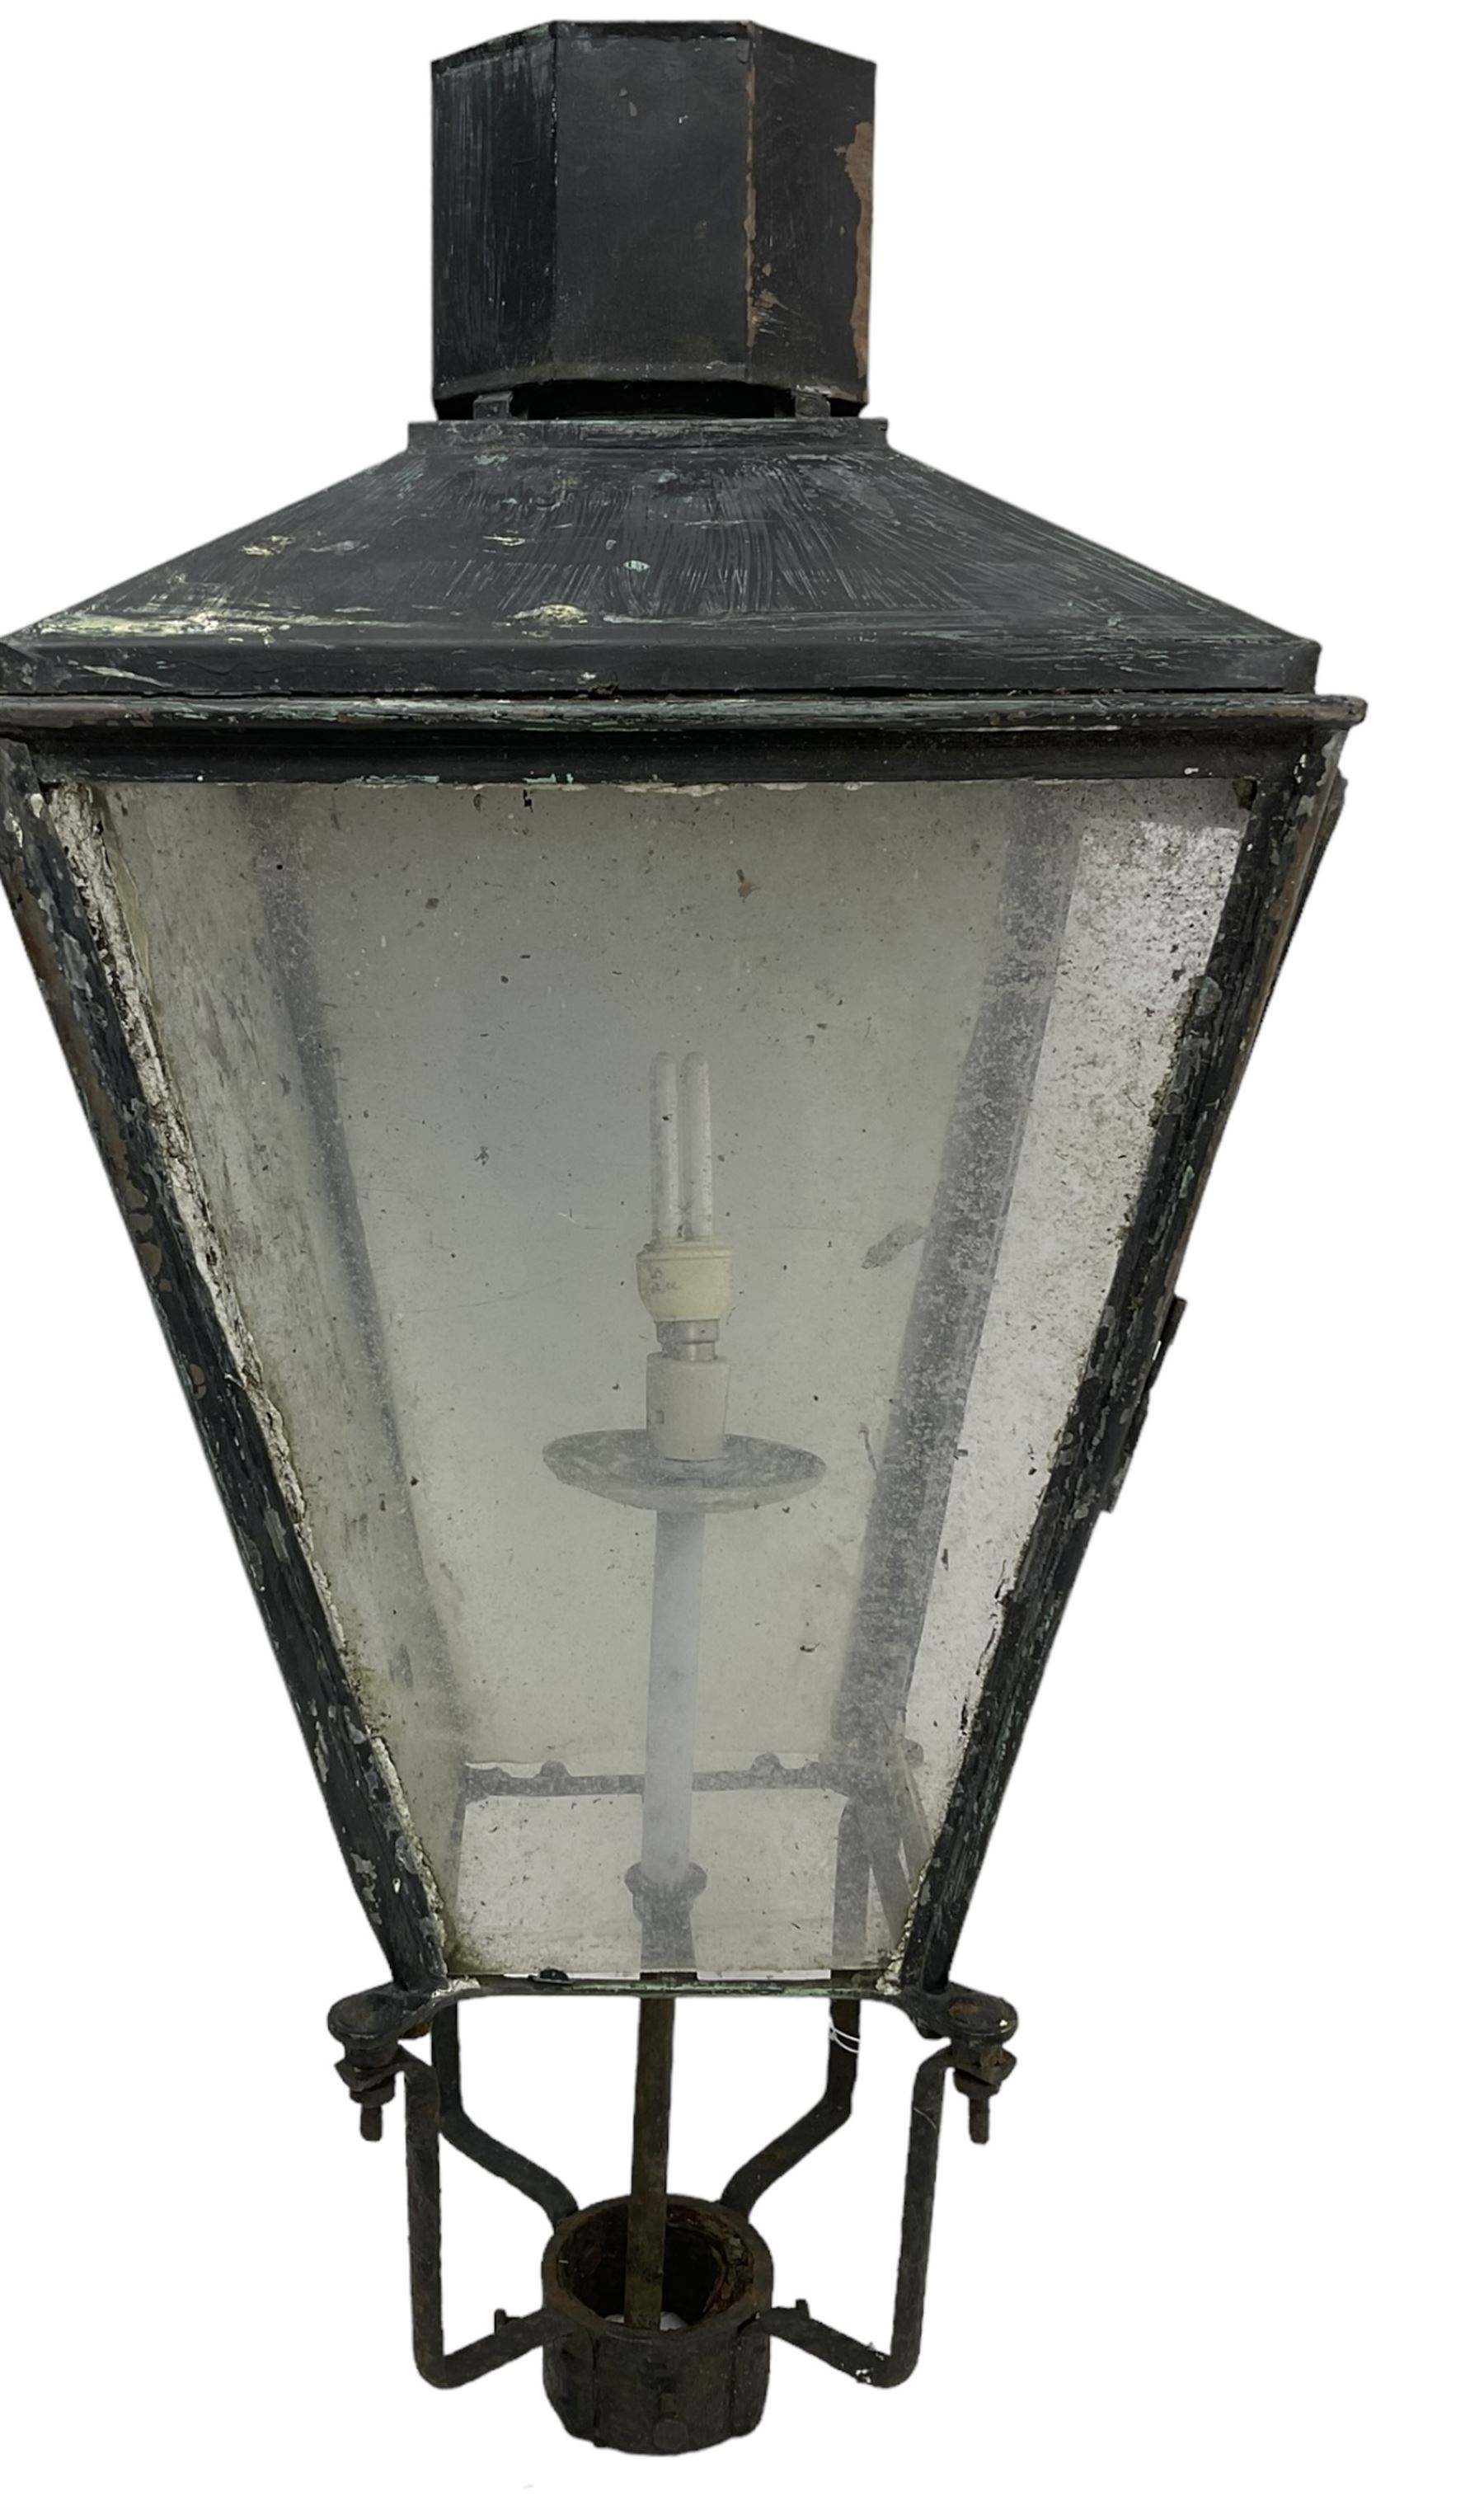 Foster & Pullen - early 20th century copper and wrought metal lantern - Image 2 of 5